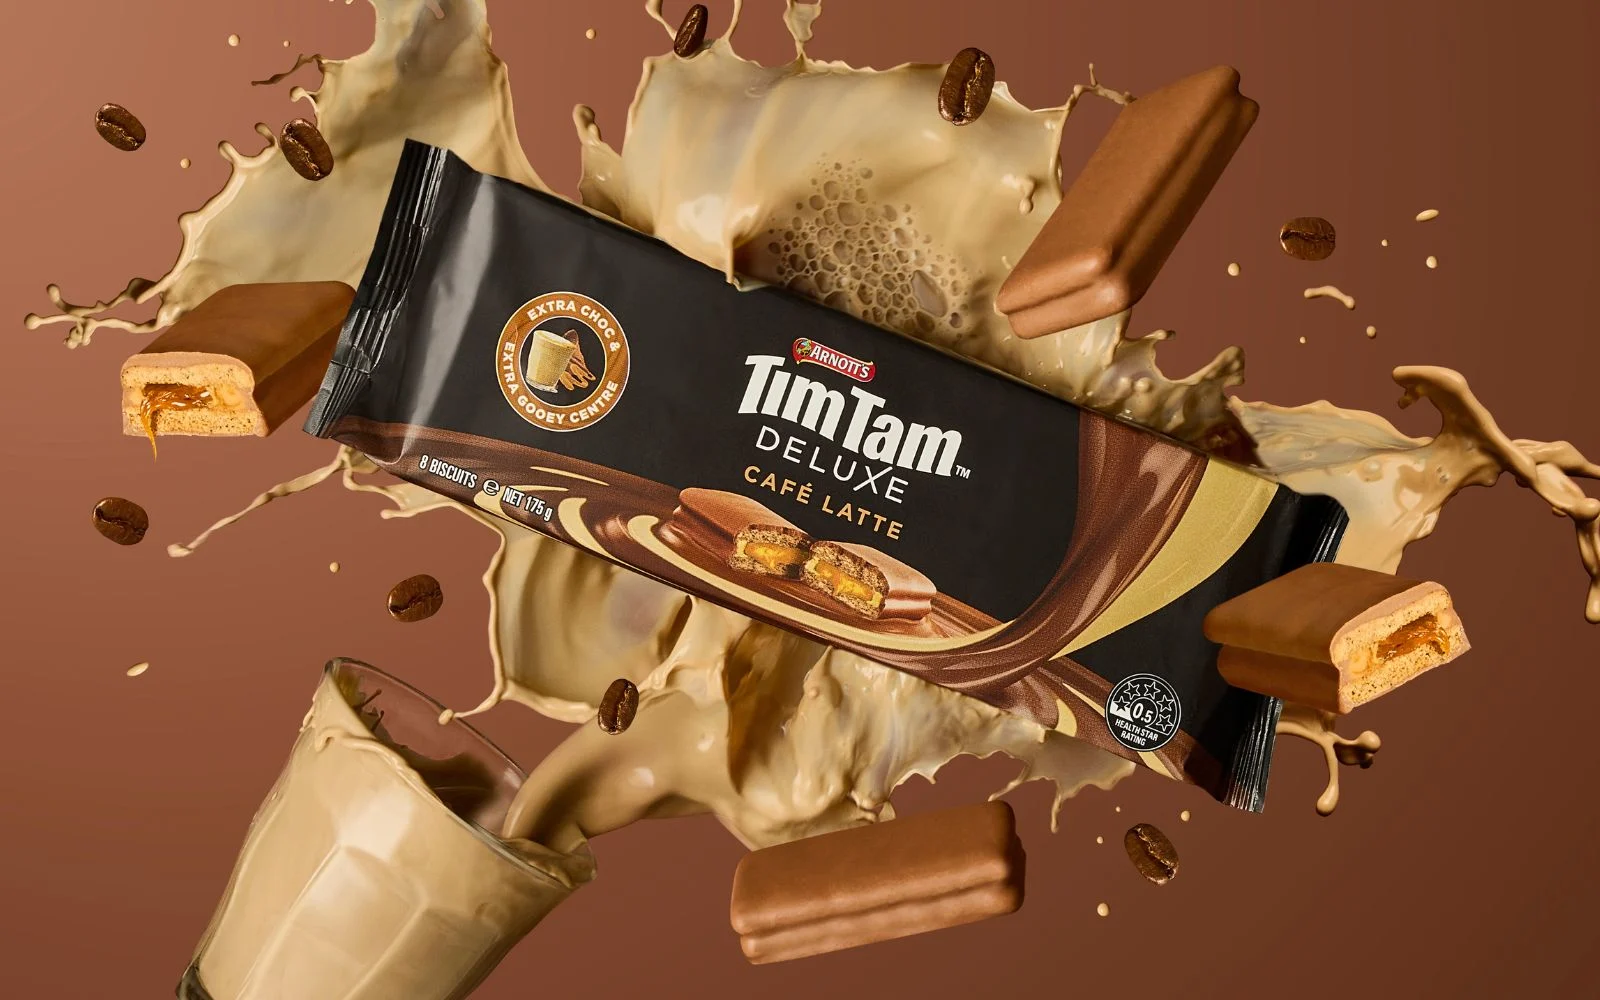 Calling all coffee lovers! Introducing NEW Tim Tam Deluxe Café Latte